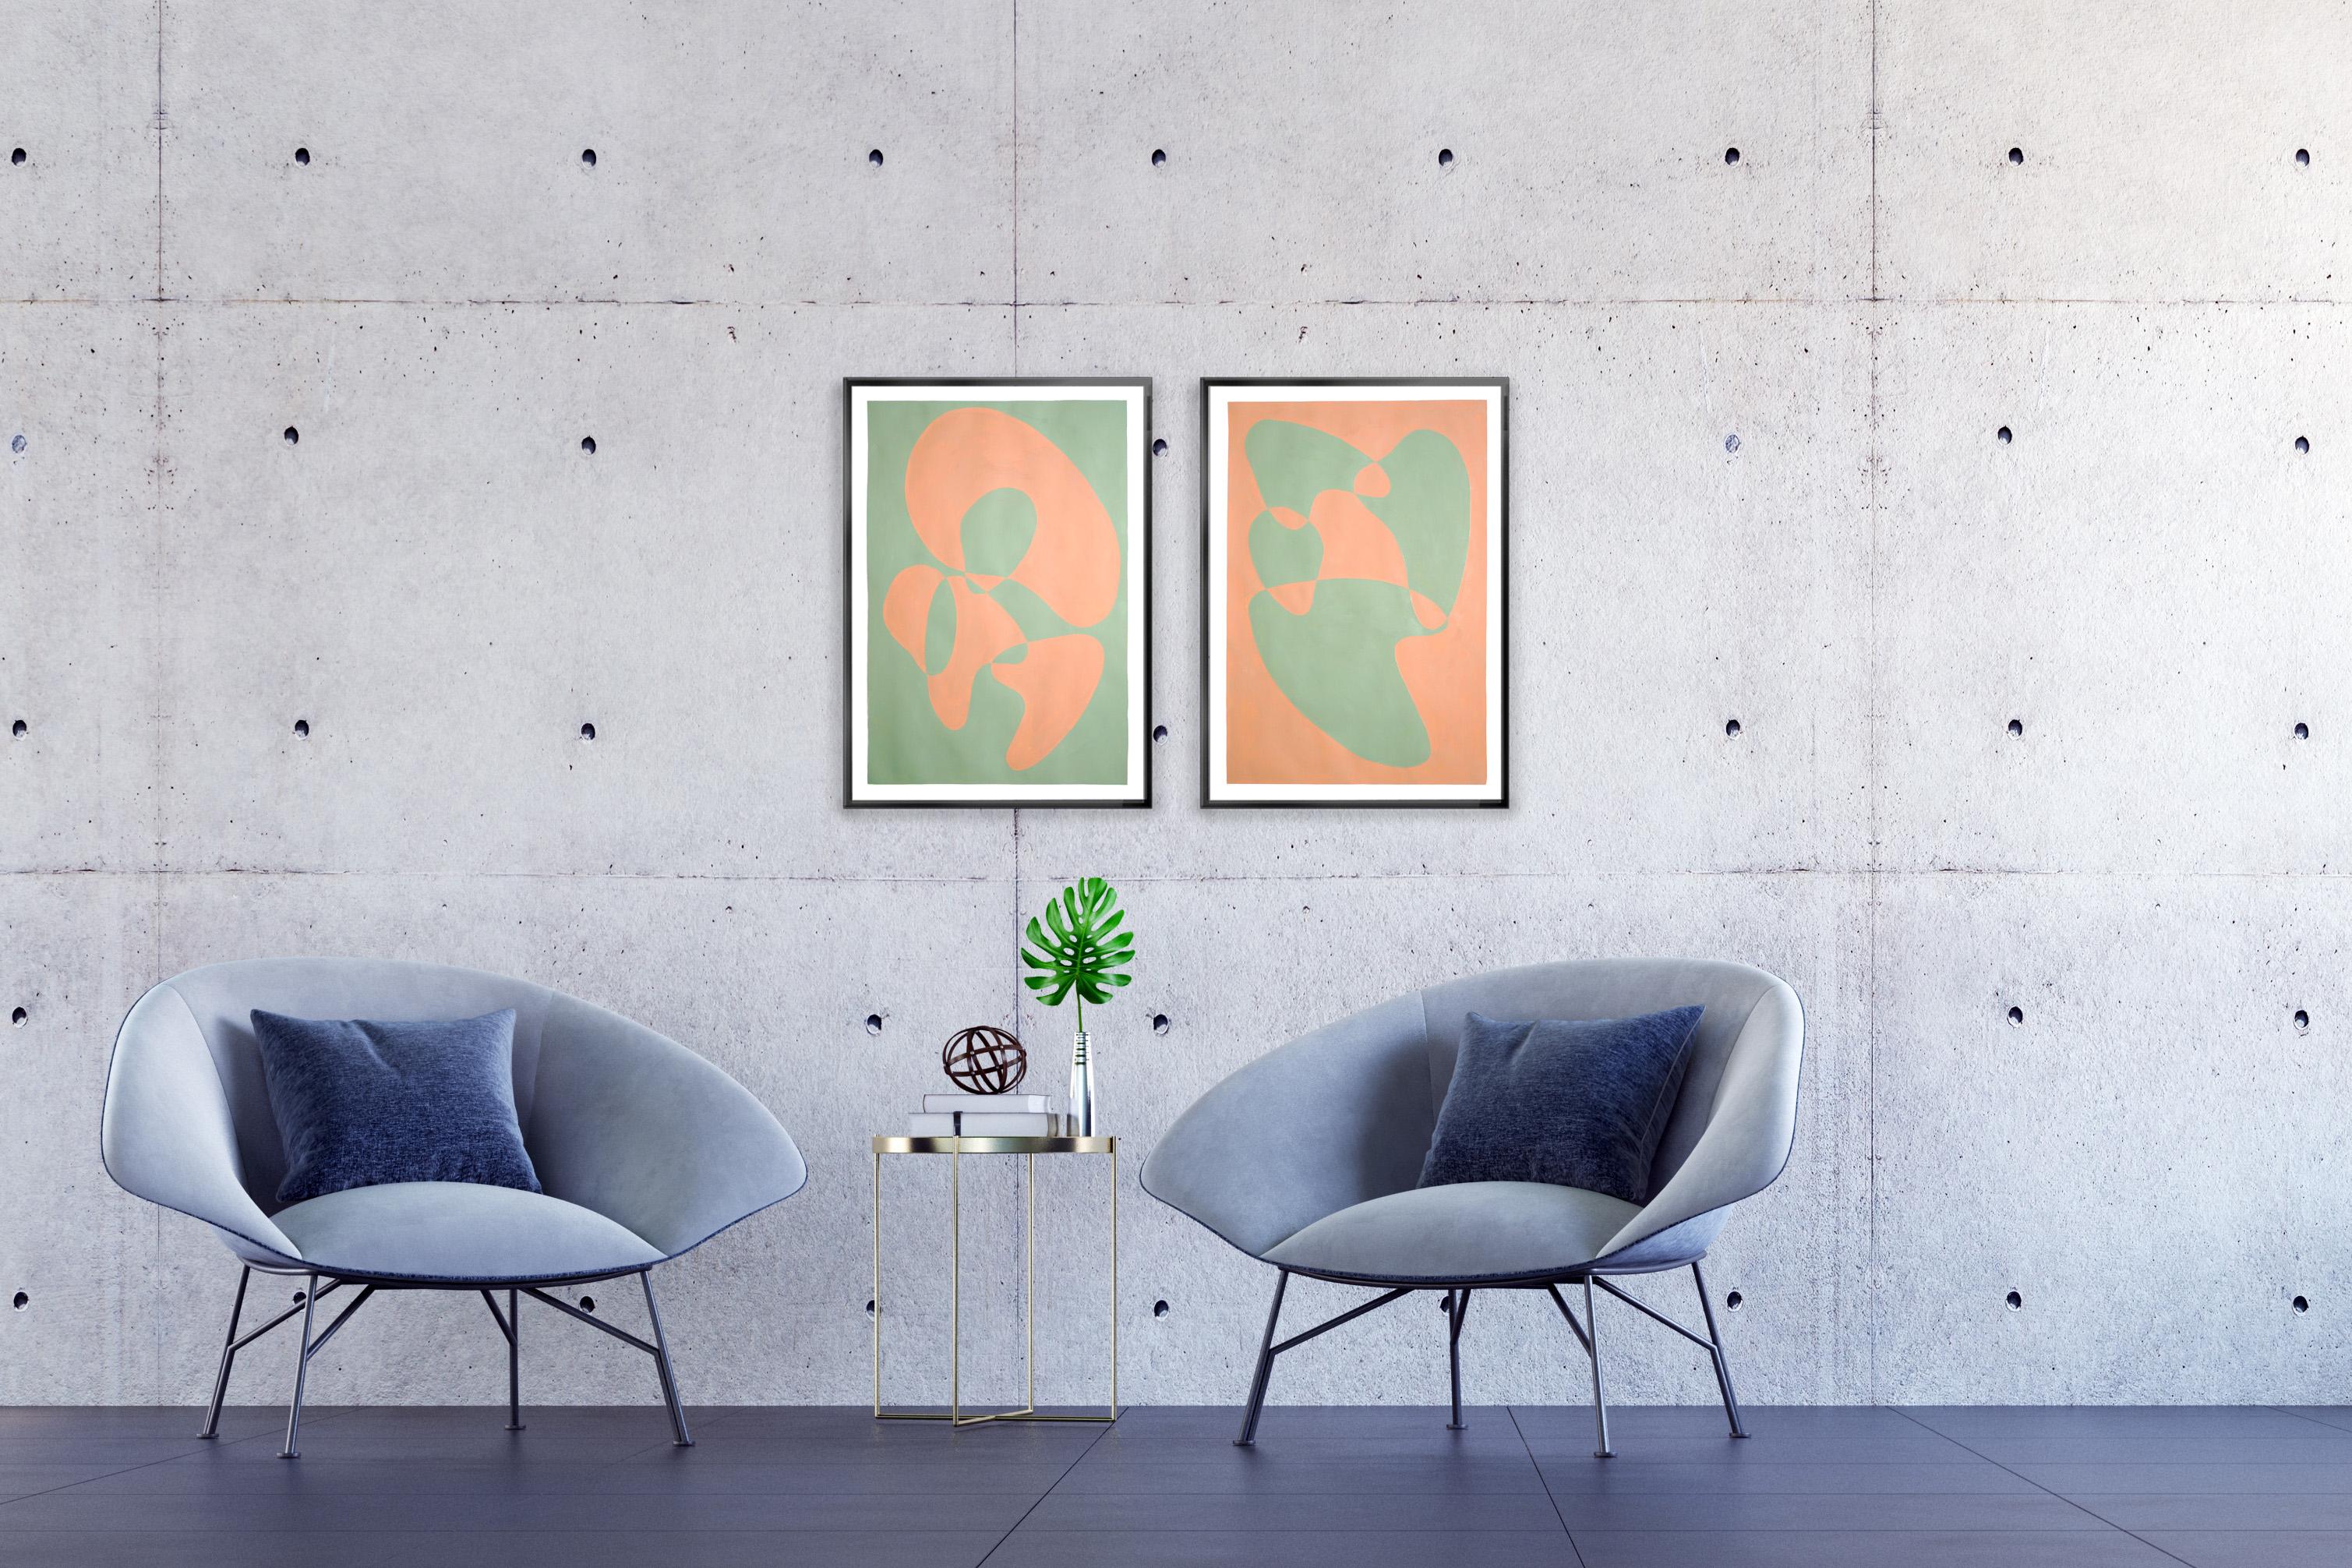 Bodies Moving Slowly, Abstract Figures Duo, Green and Tan, Pastel Tones Diptych - Painting by Ryan Rivadeneyra